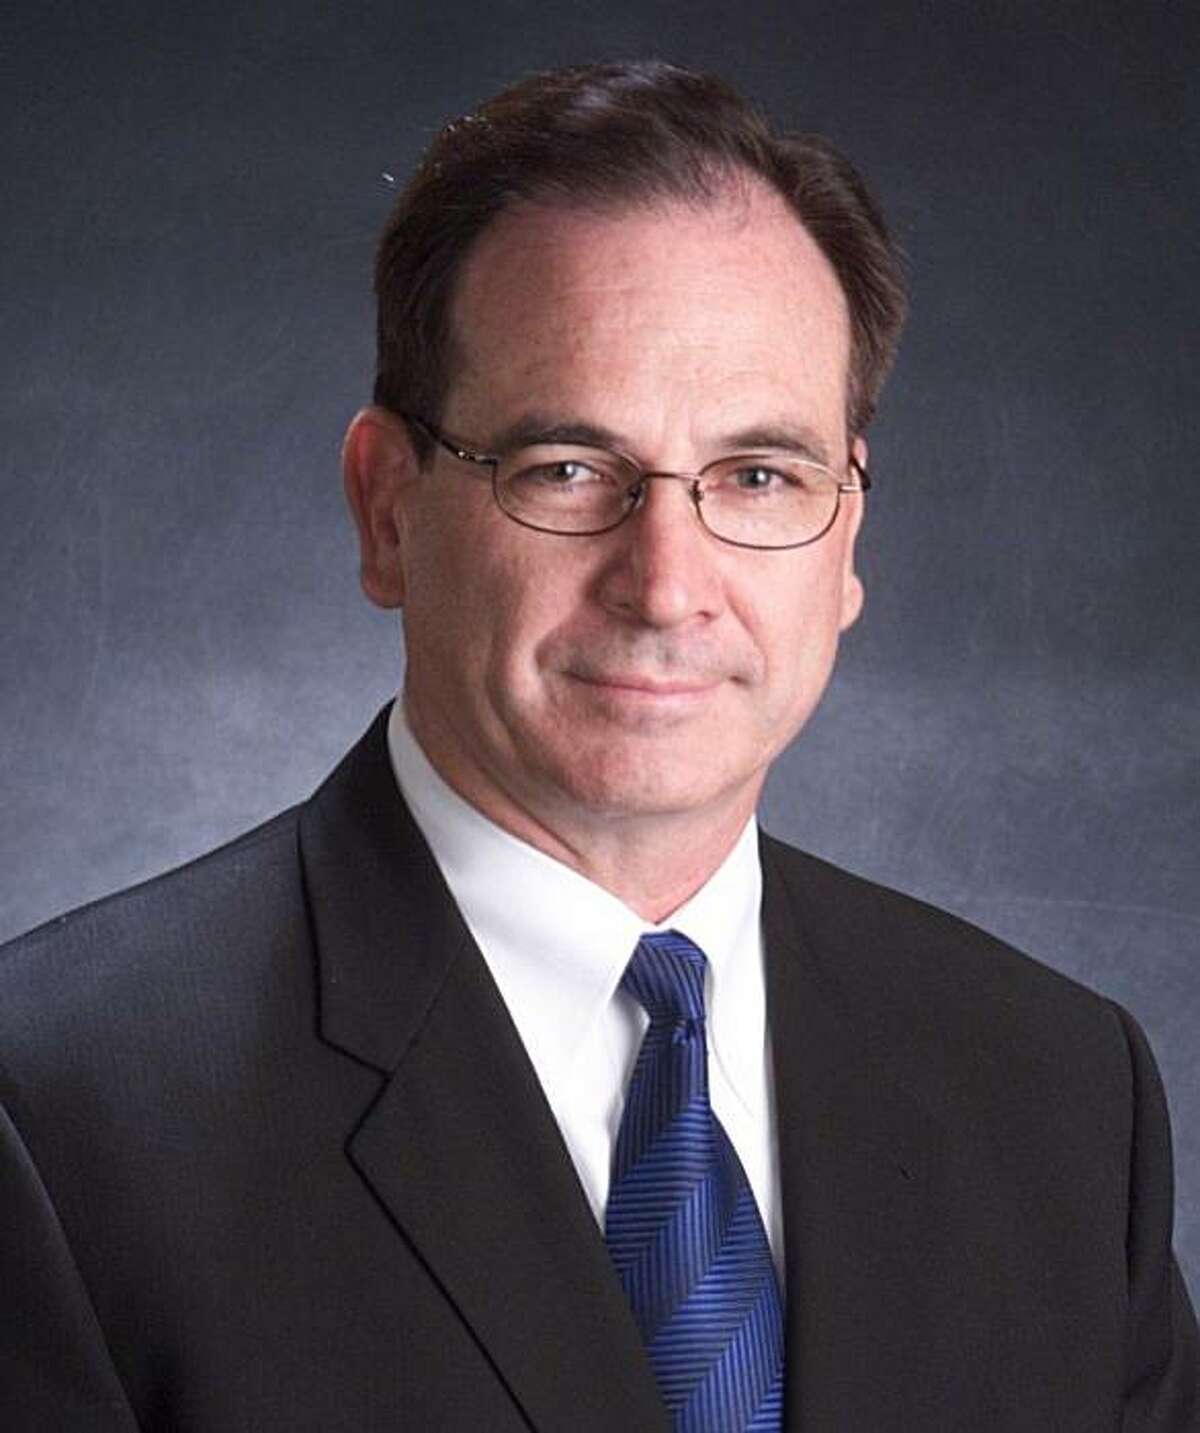 Bob Huff, part of an online chat series sponsored by Insight